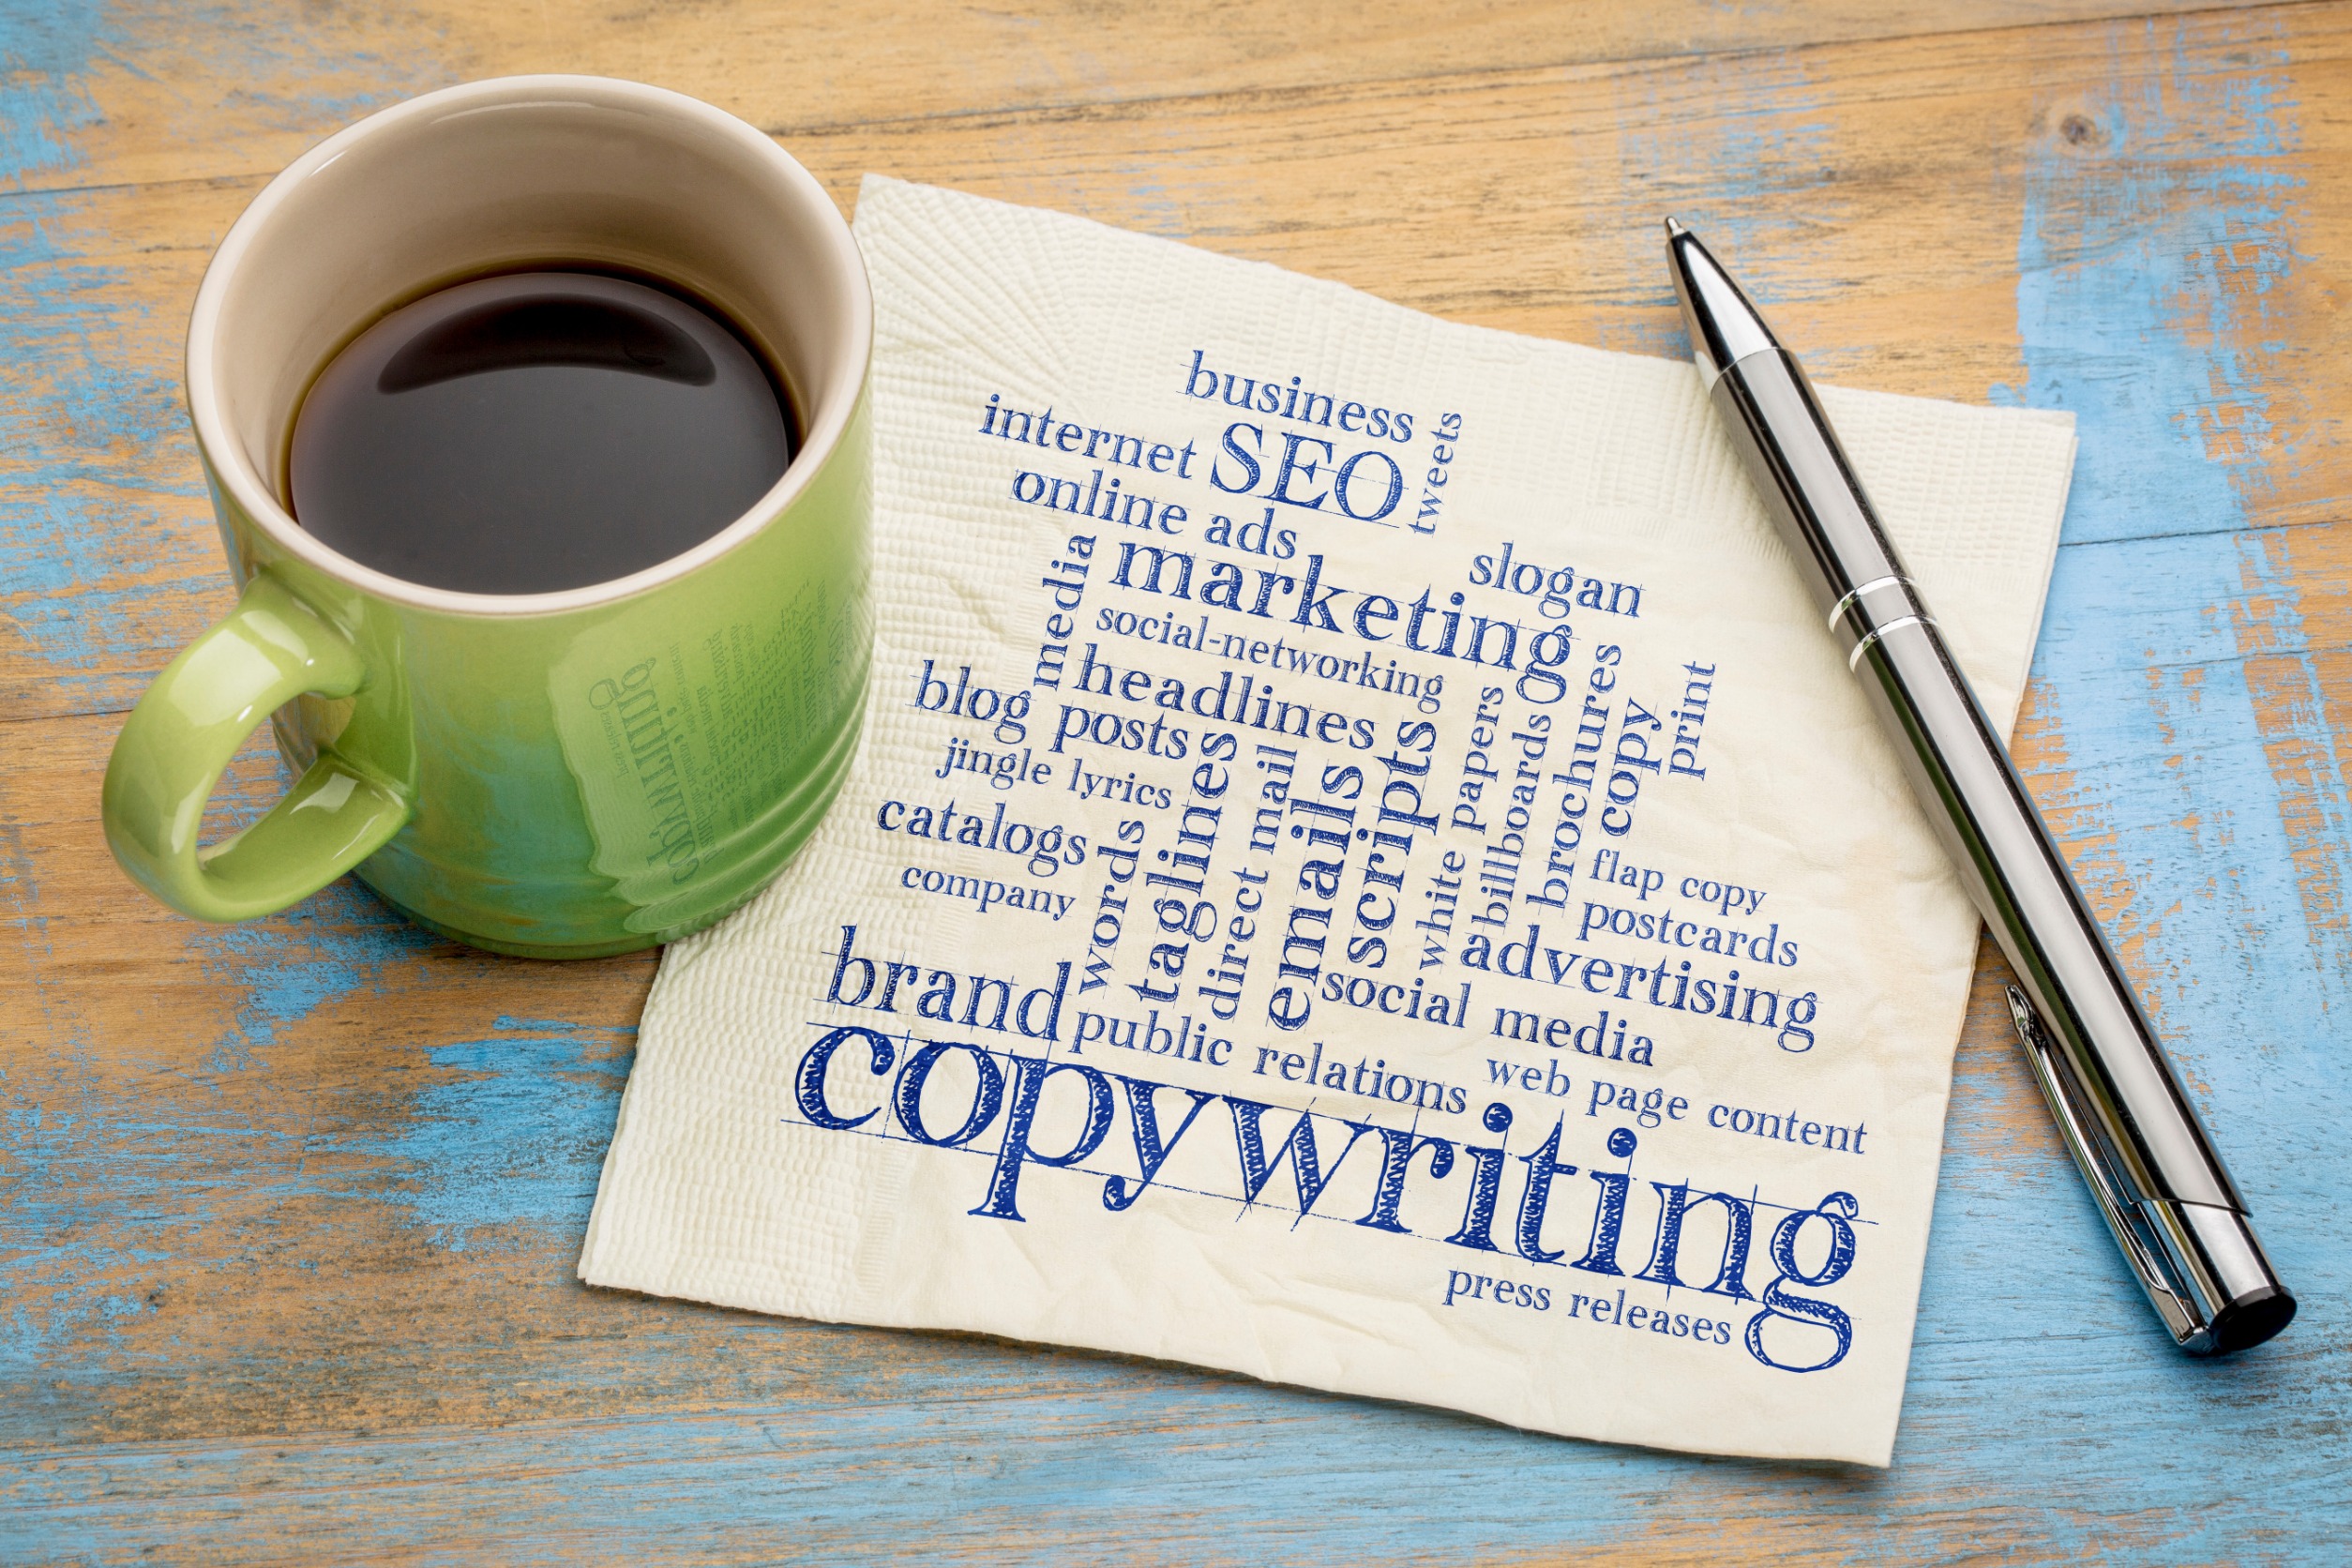 4 Simple but Powerful Tactics for Writing Compelling Ad Copy